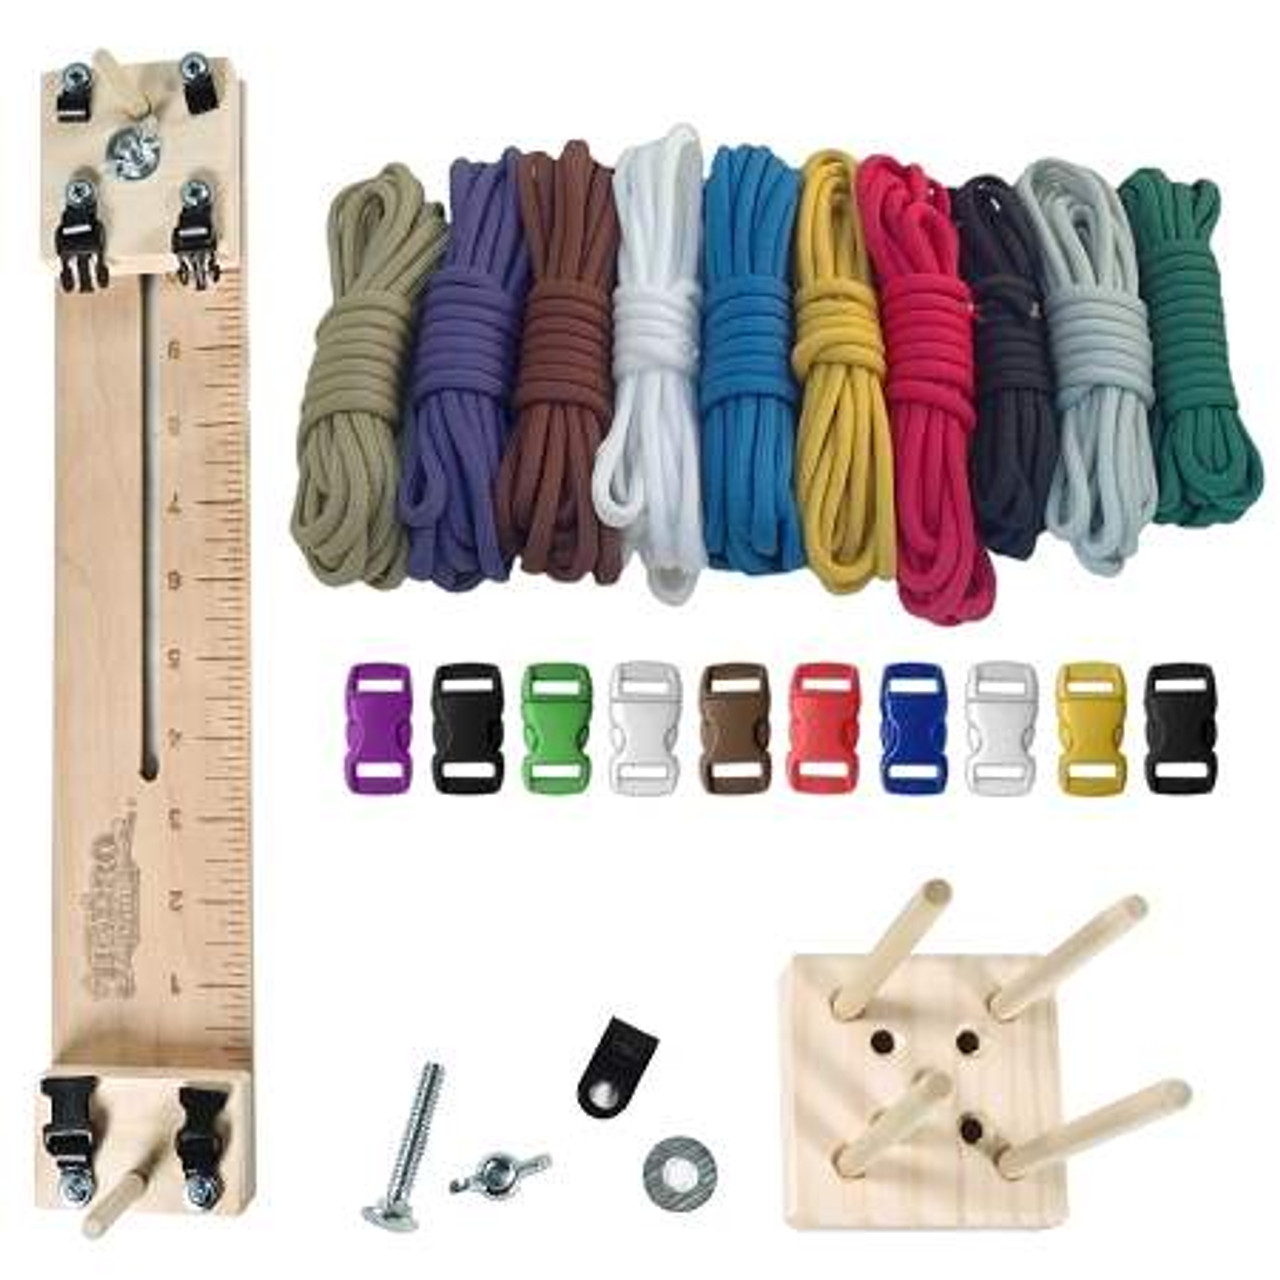 Paracord Crafting Kit w/ 10 Pocket Pro Jig & Monkey Form - Witch